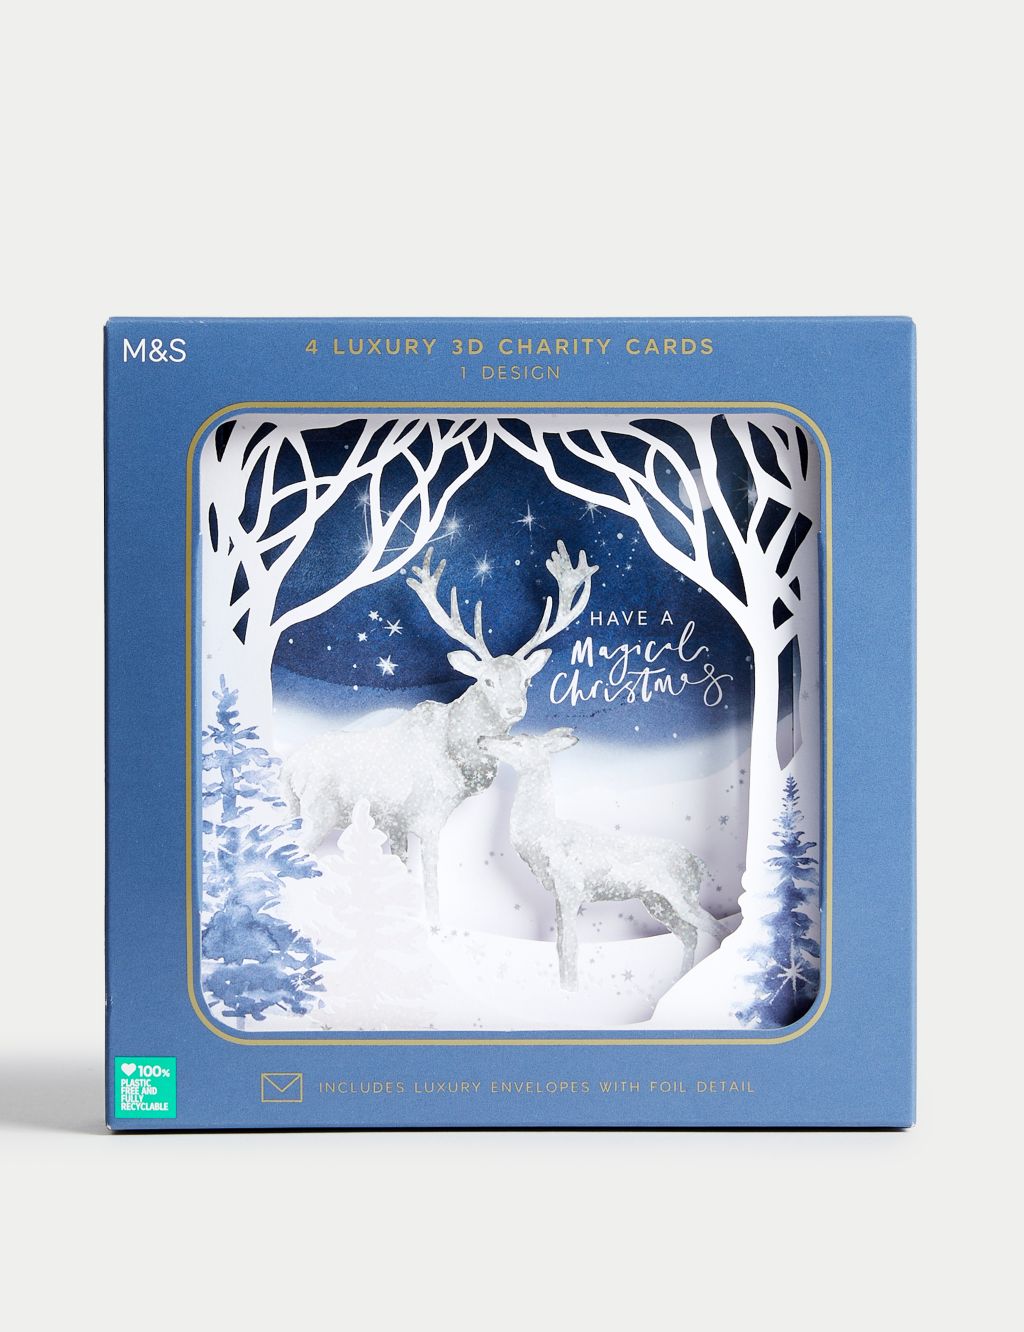 Luxury Charity Christmas Cards - Pack of 4, 3D Stag Design